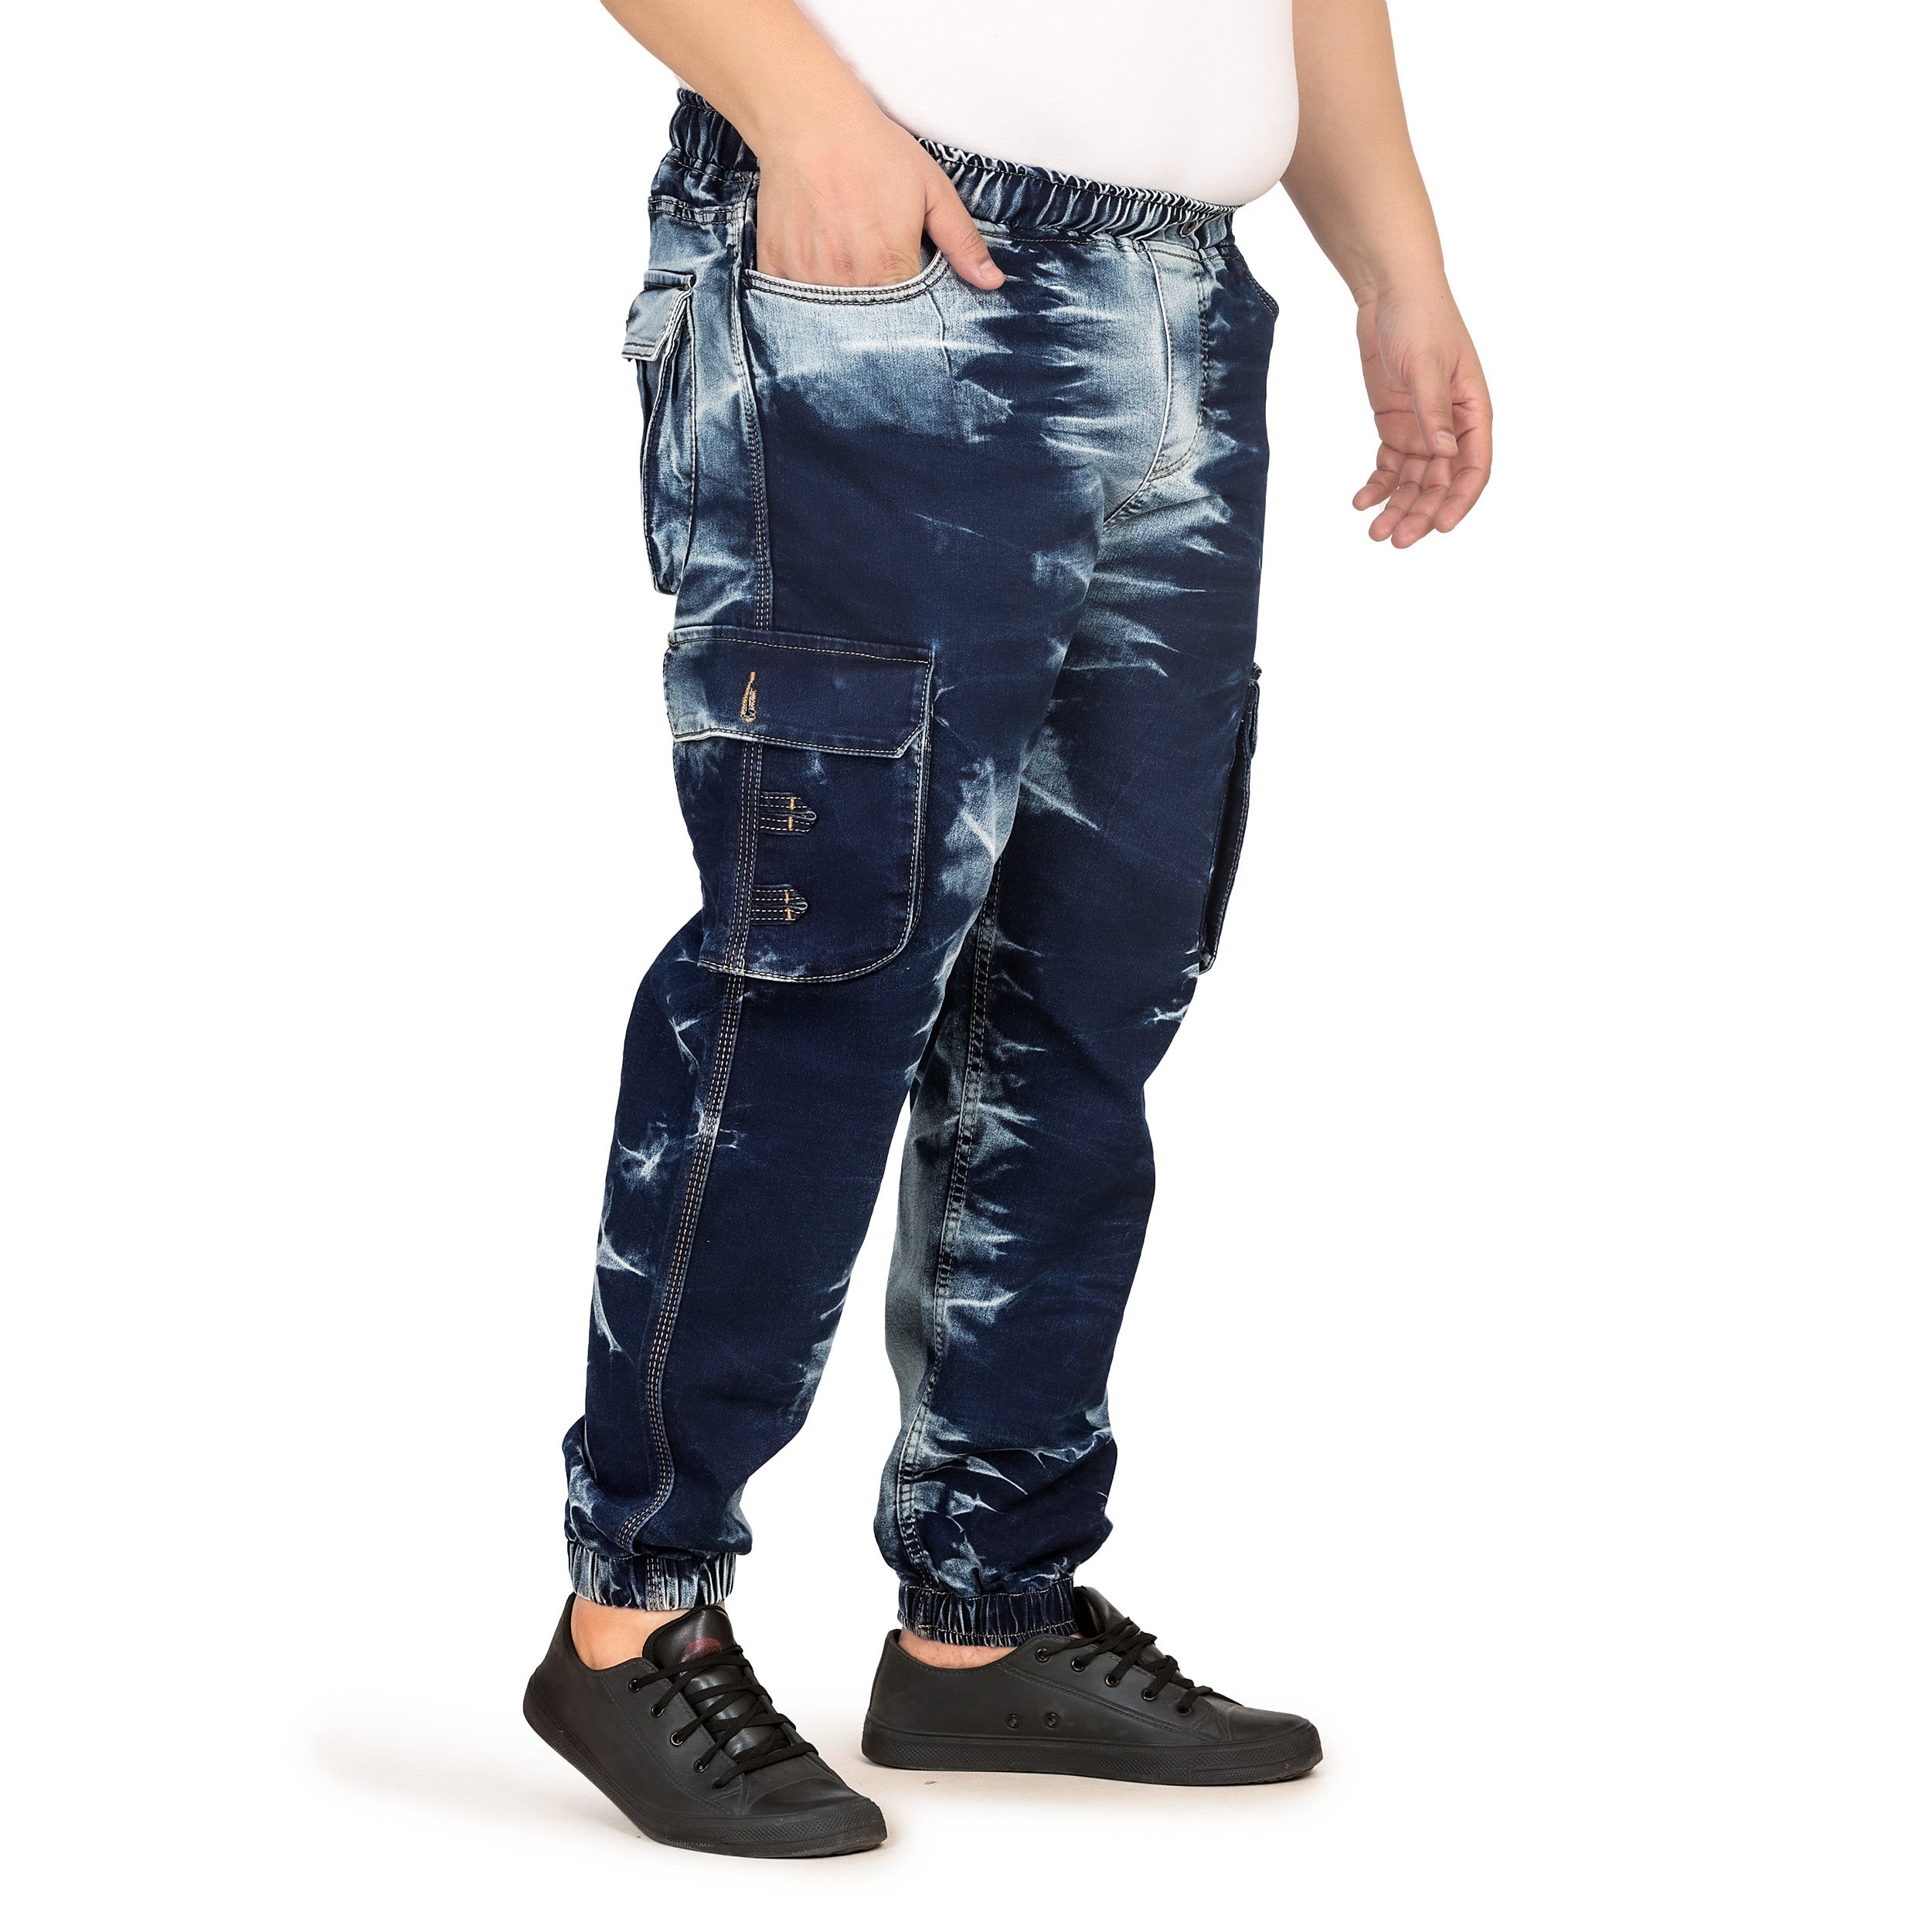 Buy Blue wide leg jeans plus size: trousers, blue color, denim, casual  style, buy in VOVK online store.